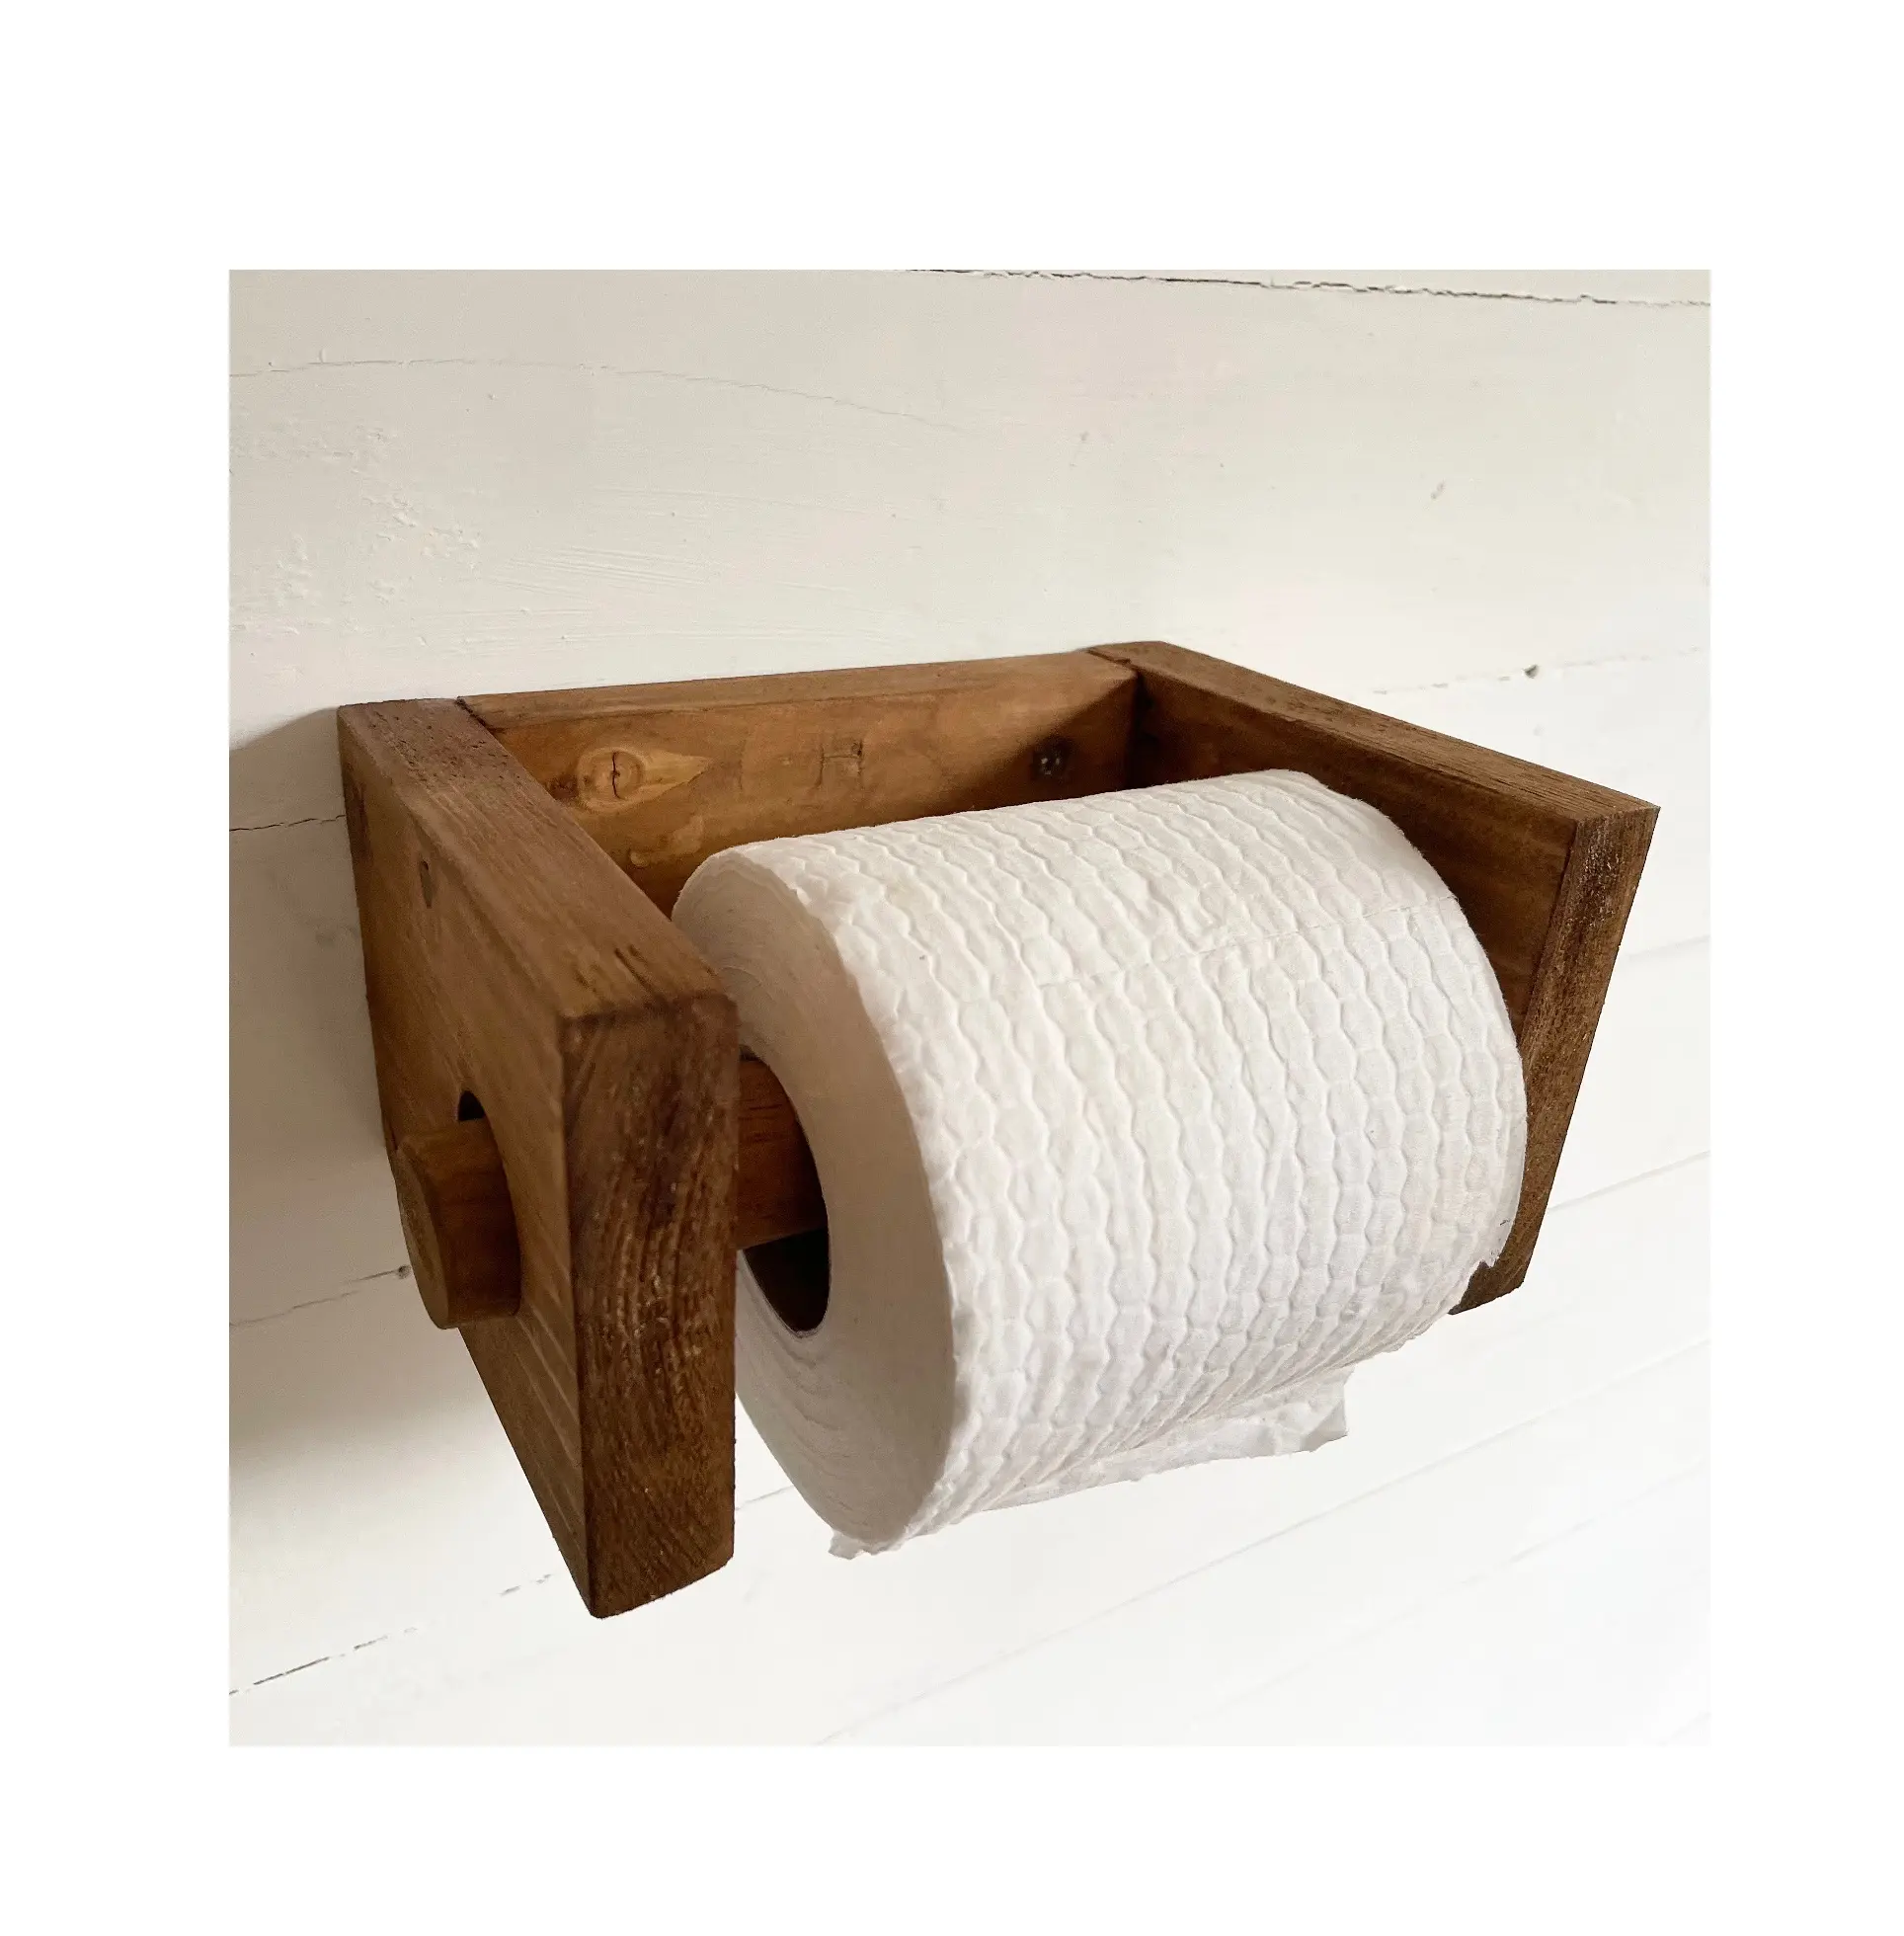 Best Selling Wood Kitchen Office Bathroom Tissue Toilet Paper Roll Holder for wall decorative items